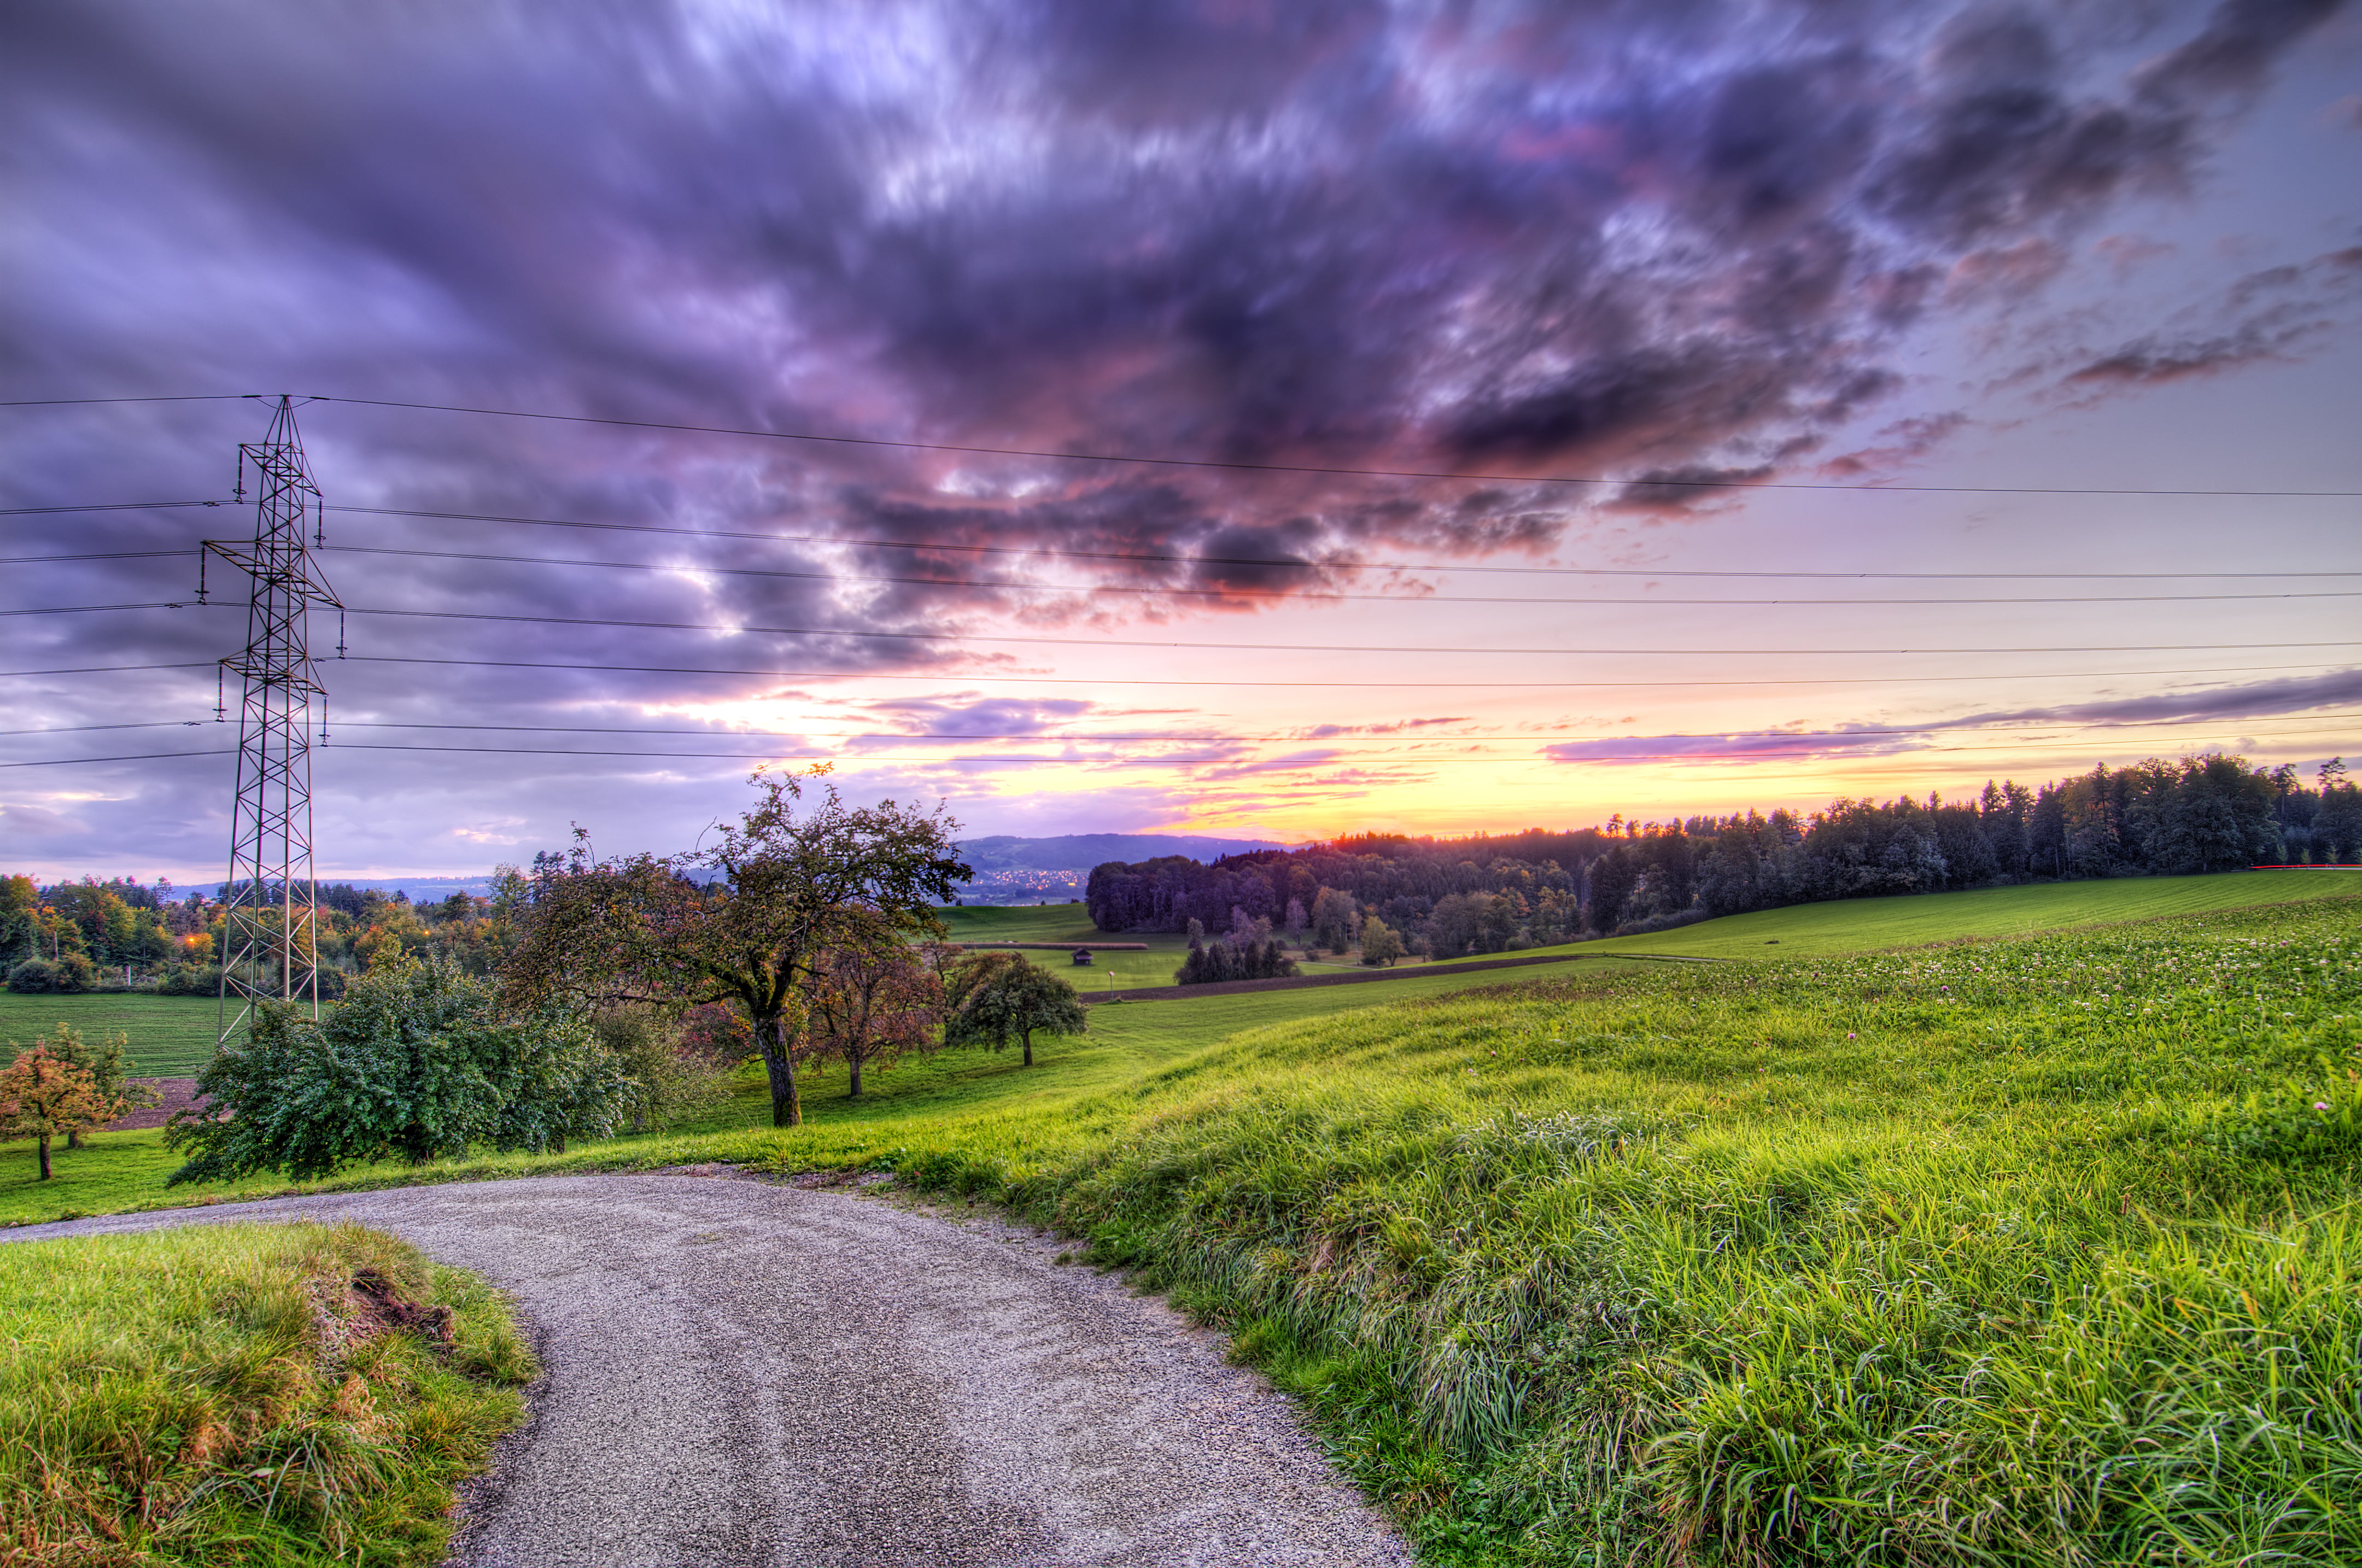 empty road in between grass field under gray clouds during sunset